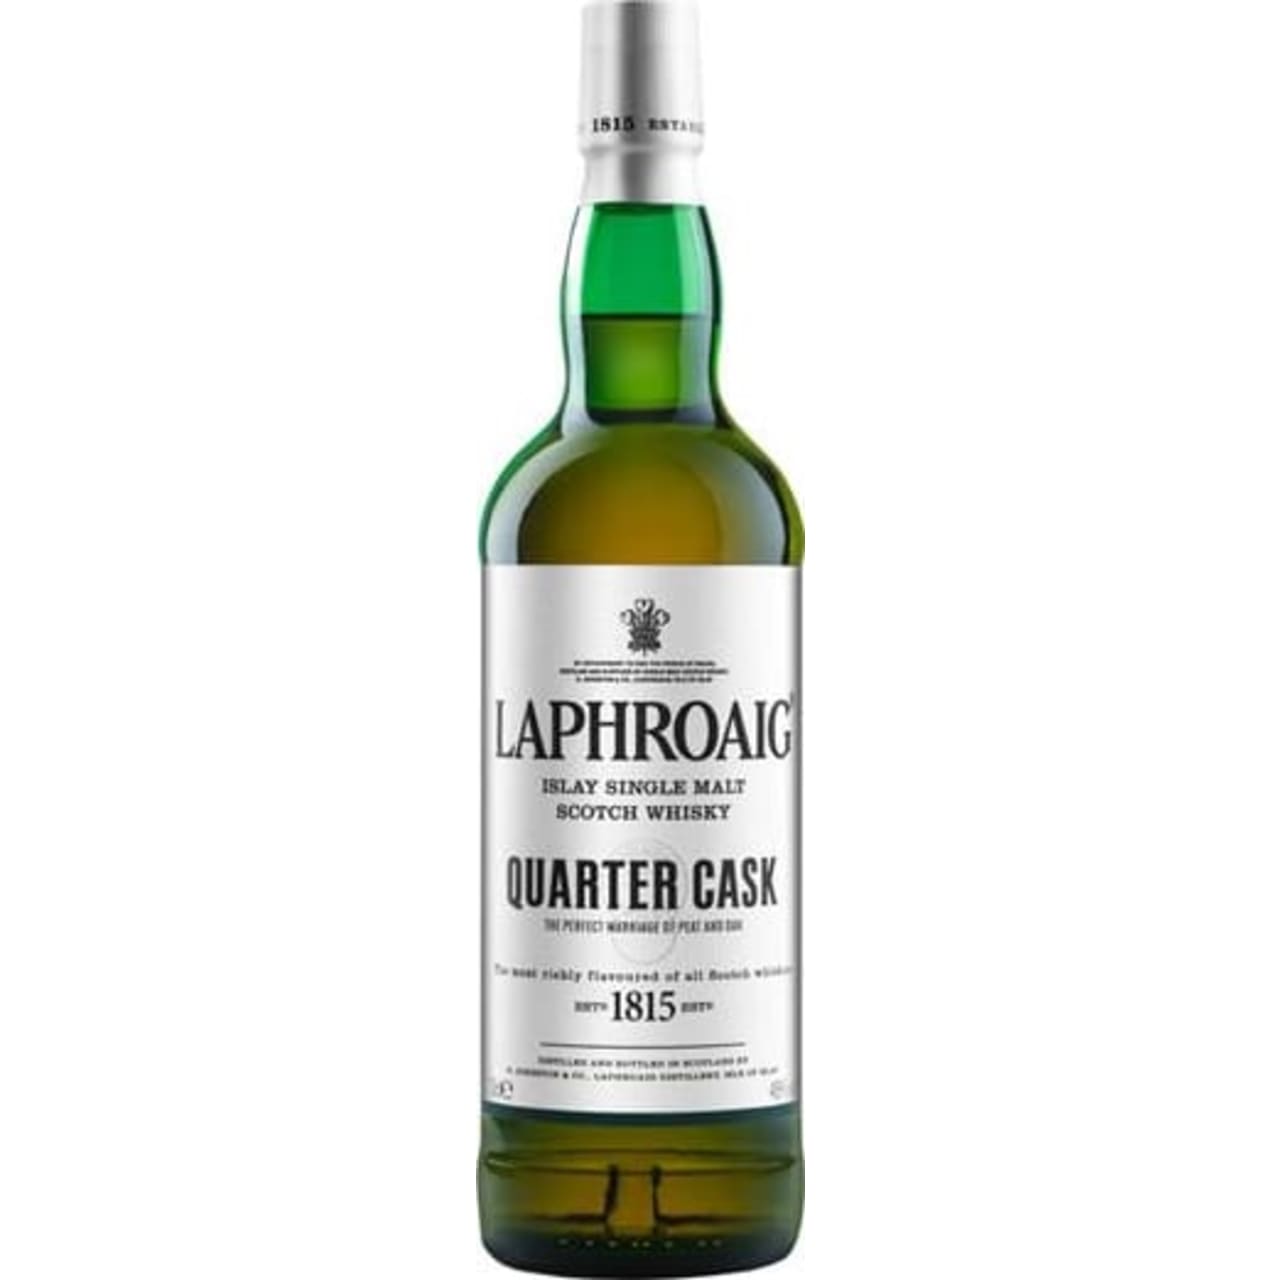 A vibrant young Laphroaig whose maturation has been accelerated by ageing in quarter casks. This shows soft sweetness and a velvety feel when first tasted, then the intense peatiness so unique to Laphroaig comes bursting through.